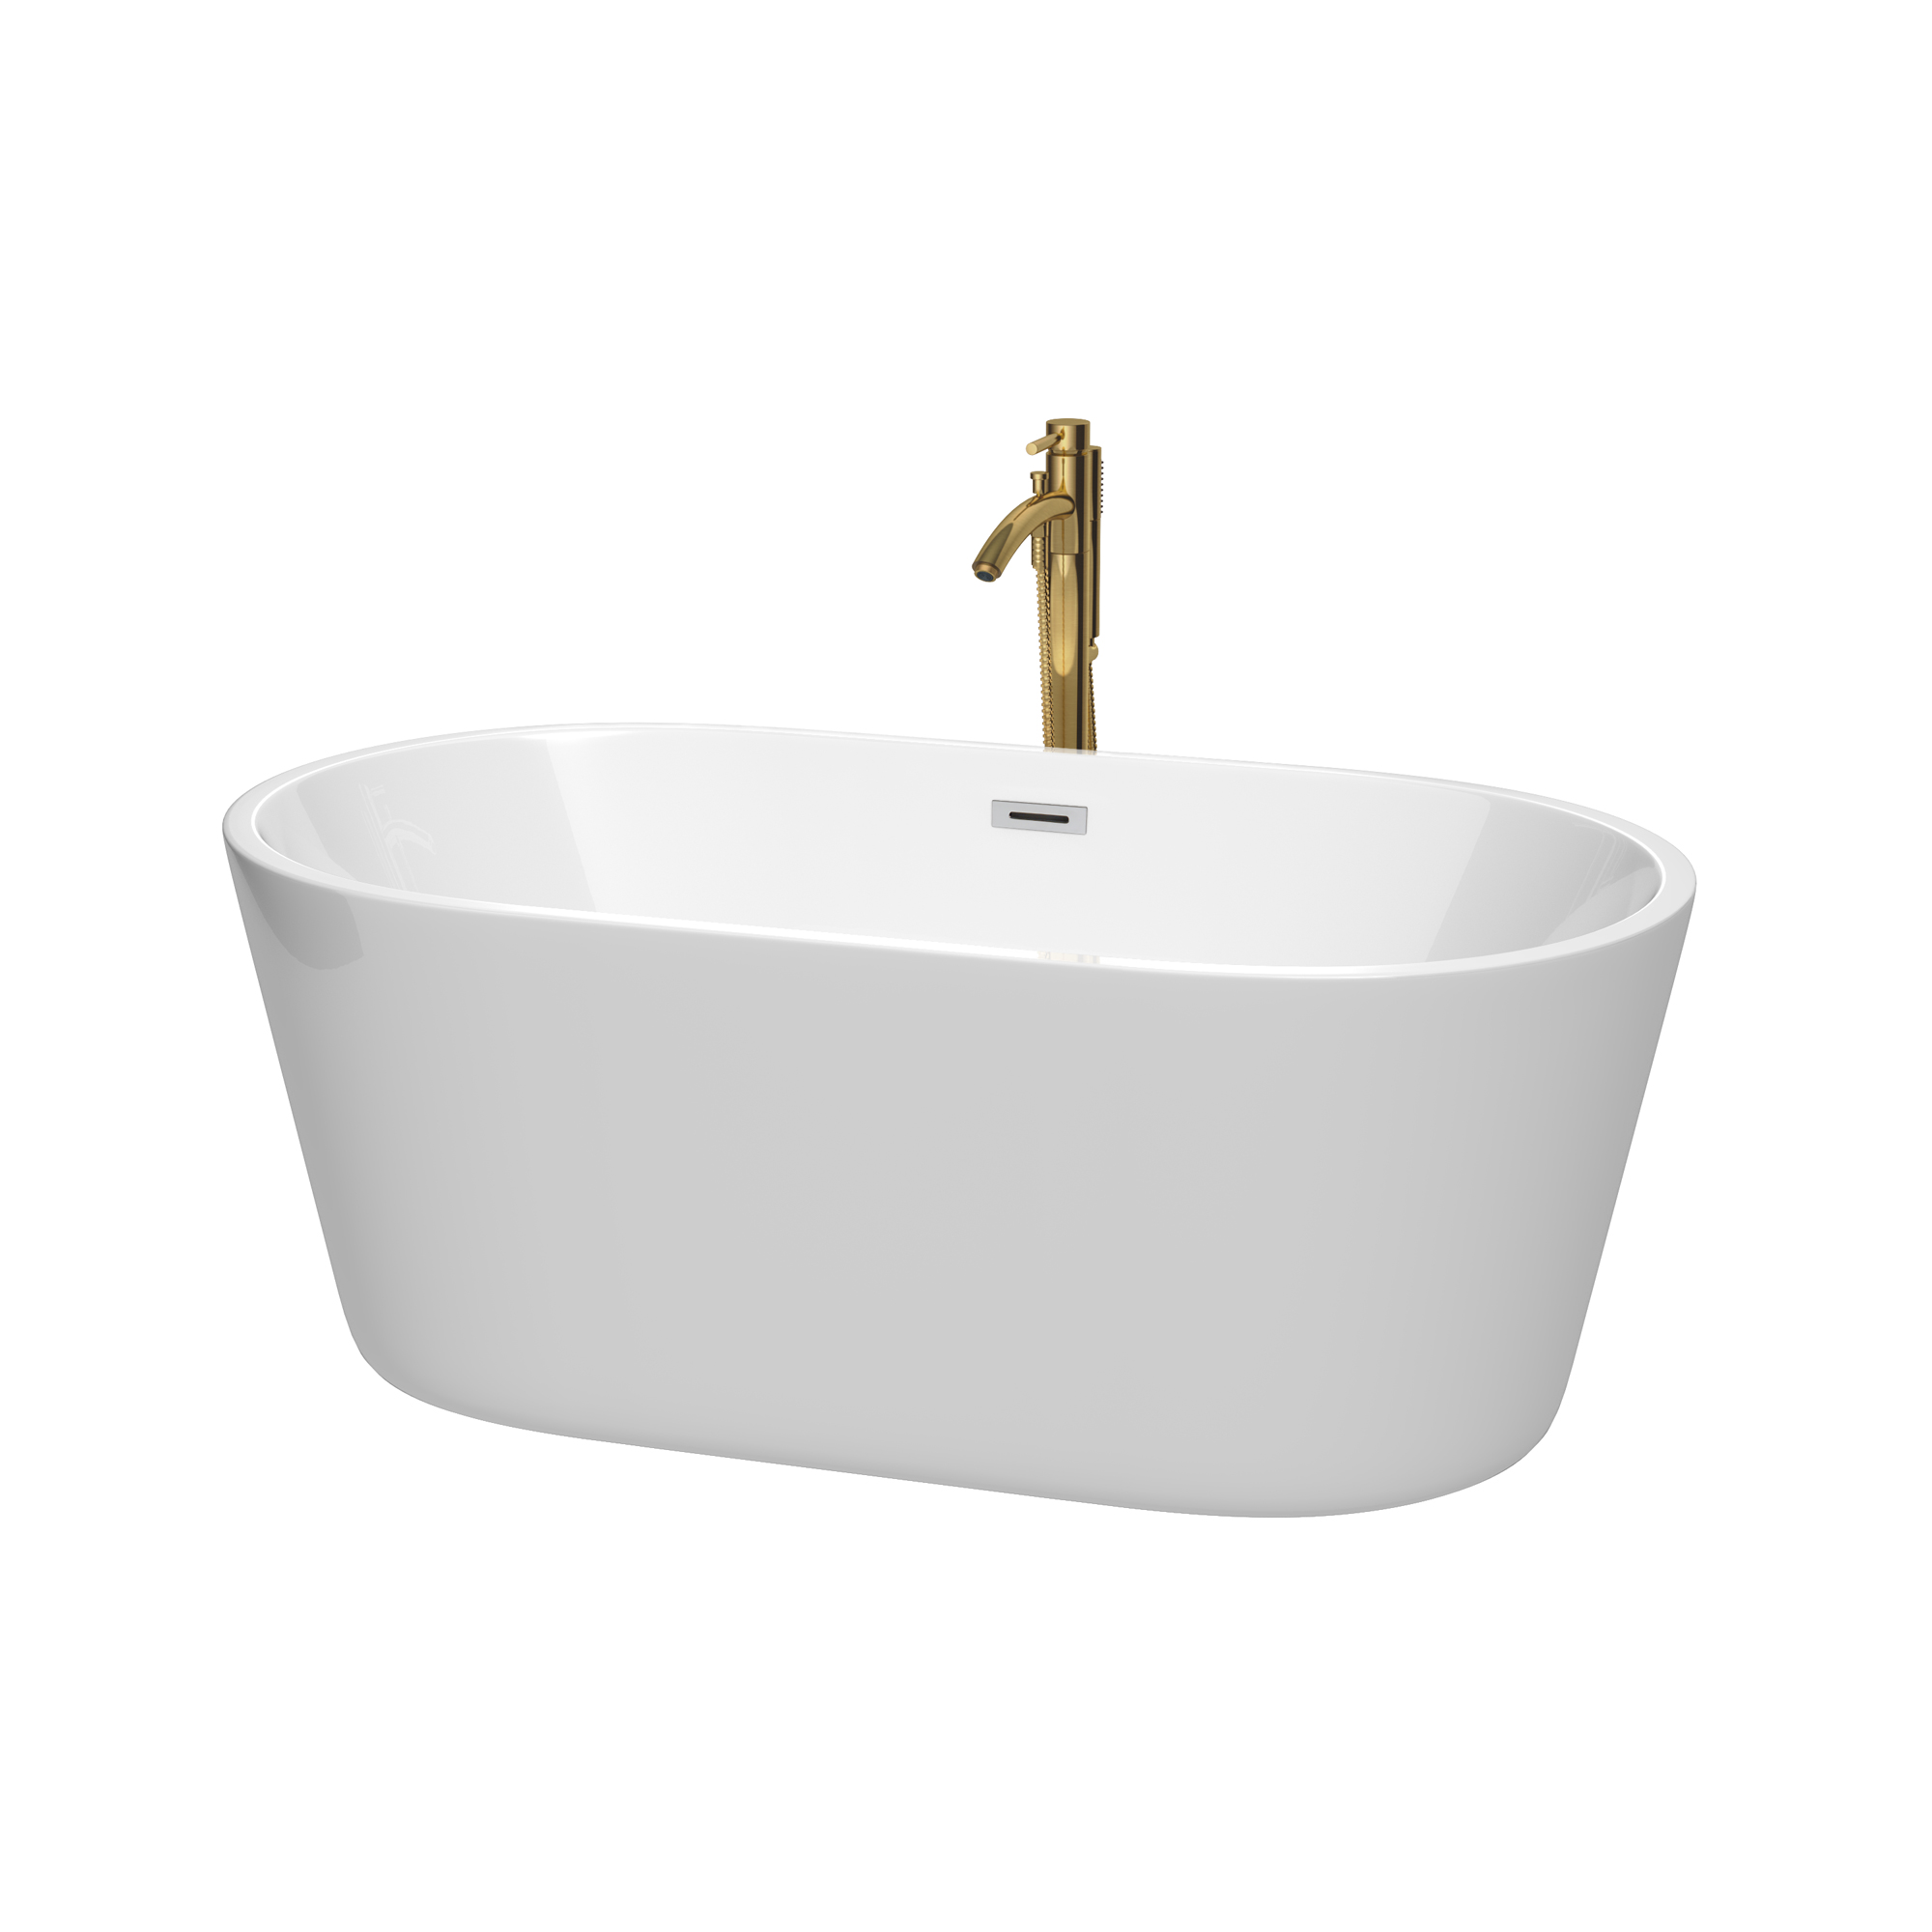 60" Freestanding Bathtub in White with Floor Mounted Faucet in Brushed Gold and Polished Chrome Trim